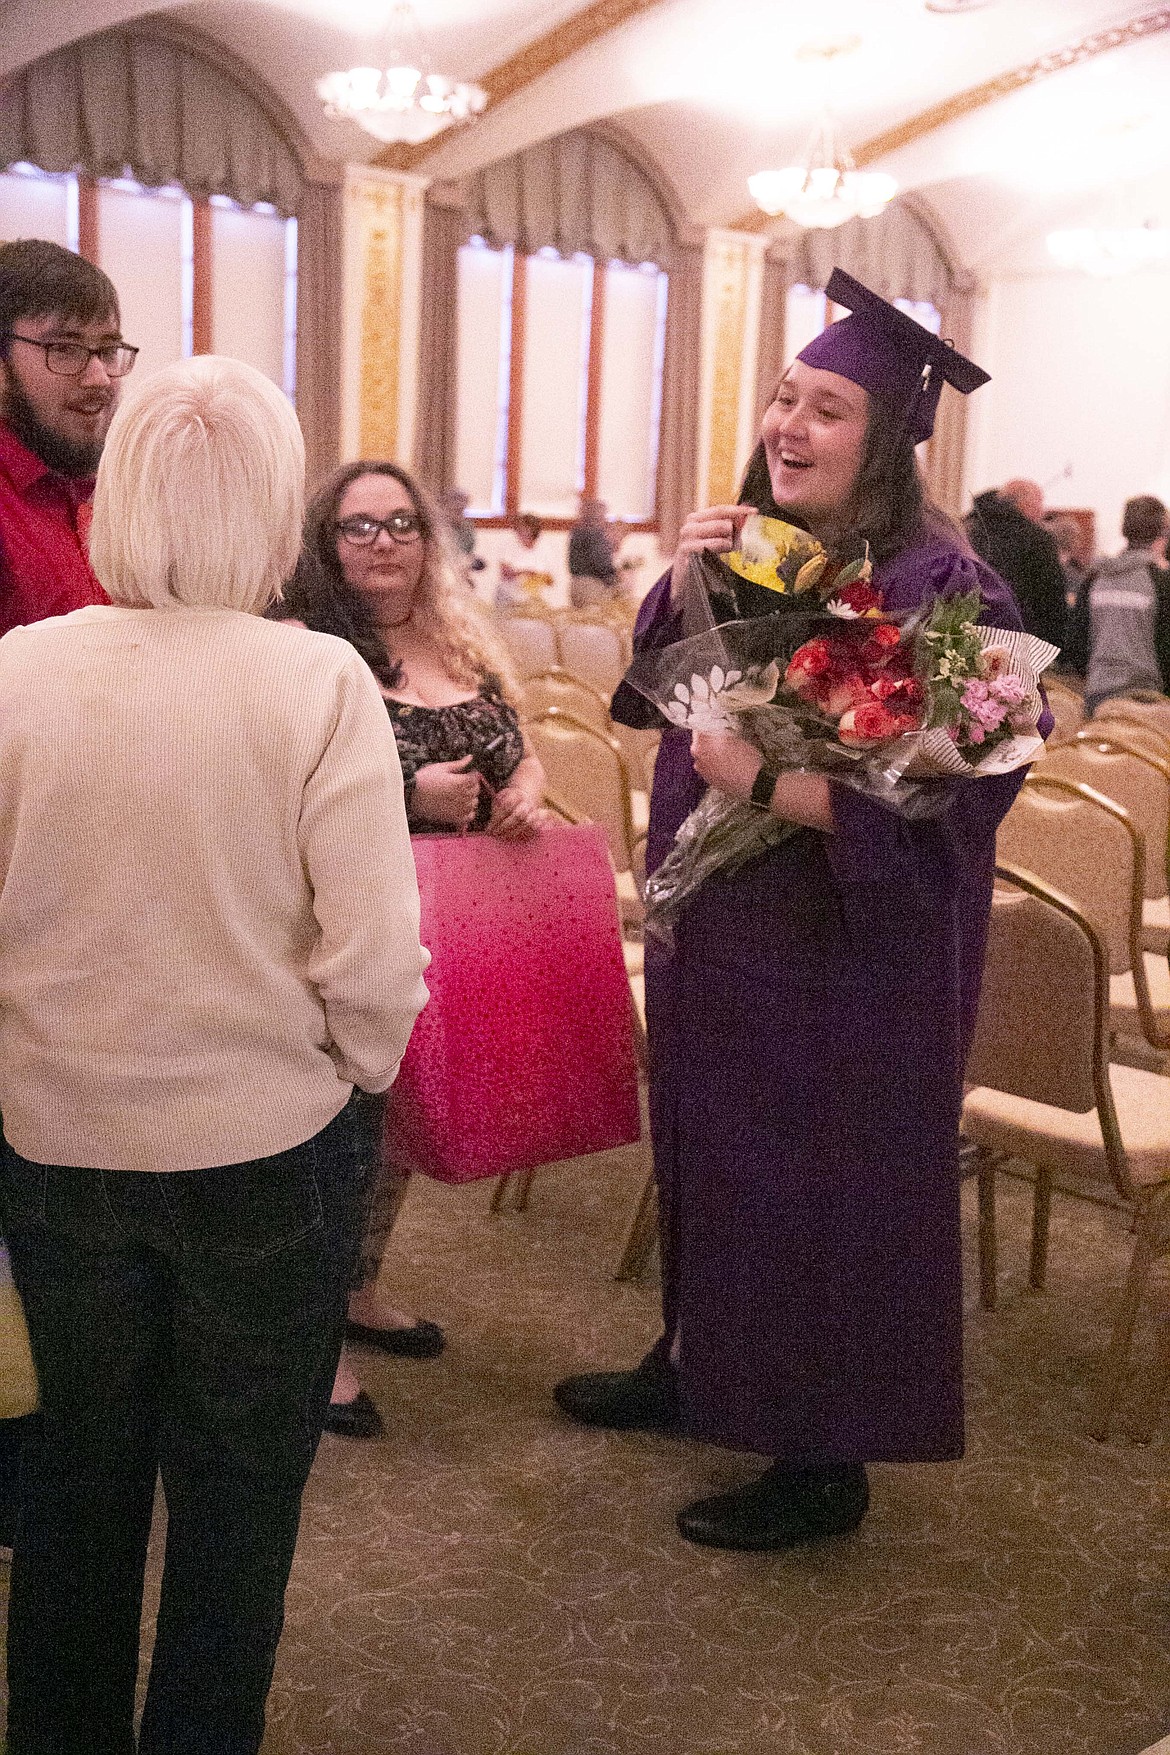 Lake Pend Oreille High School presented 26 graduates with diplomas at Thursday's commencement. Each graduate also received personalized gifts and remarks from staff members recounting their most notable moments.